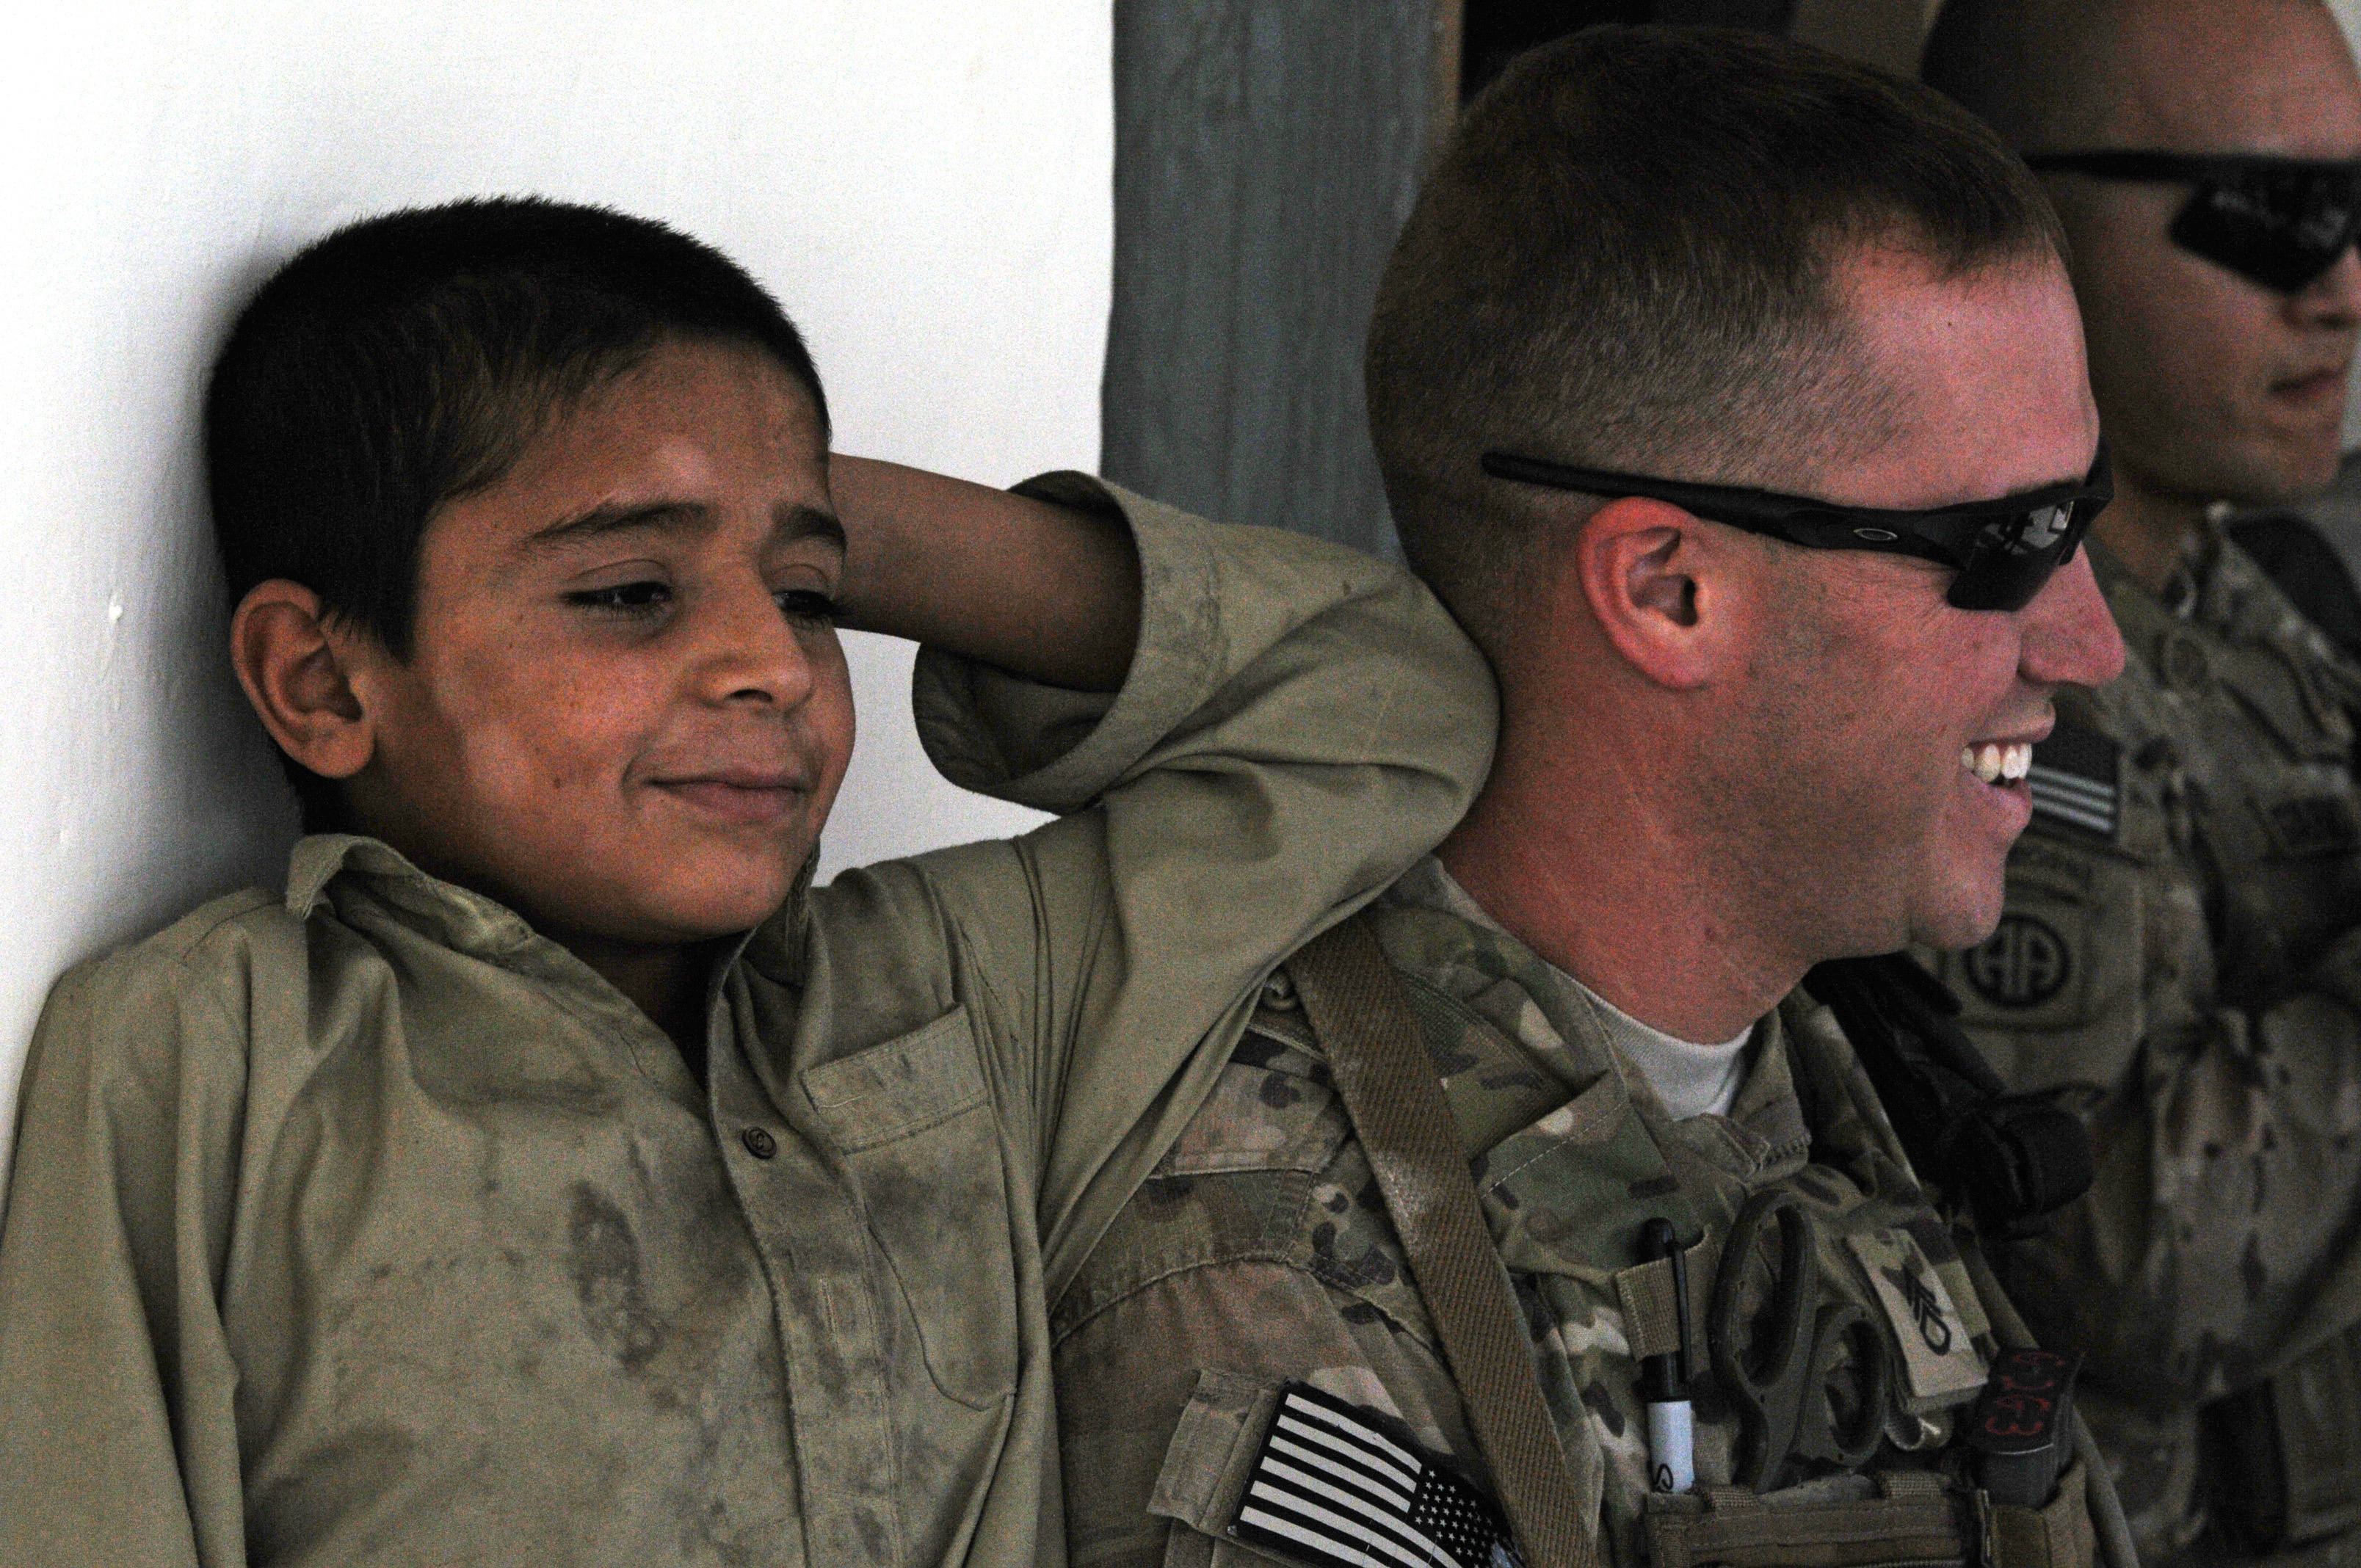 82nd Airborne Division medic interacts with Afghan child DVIDS483314